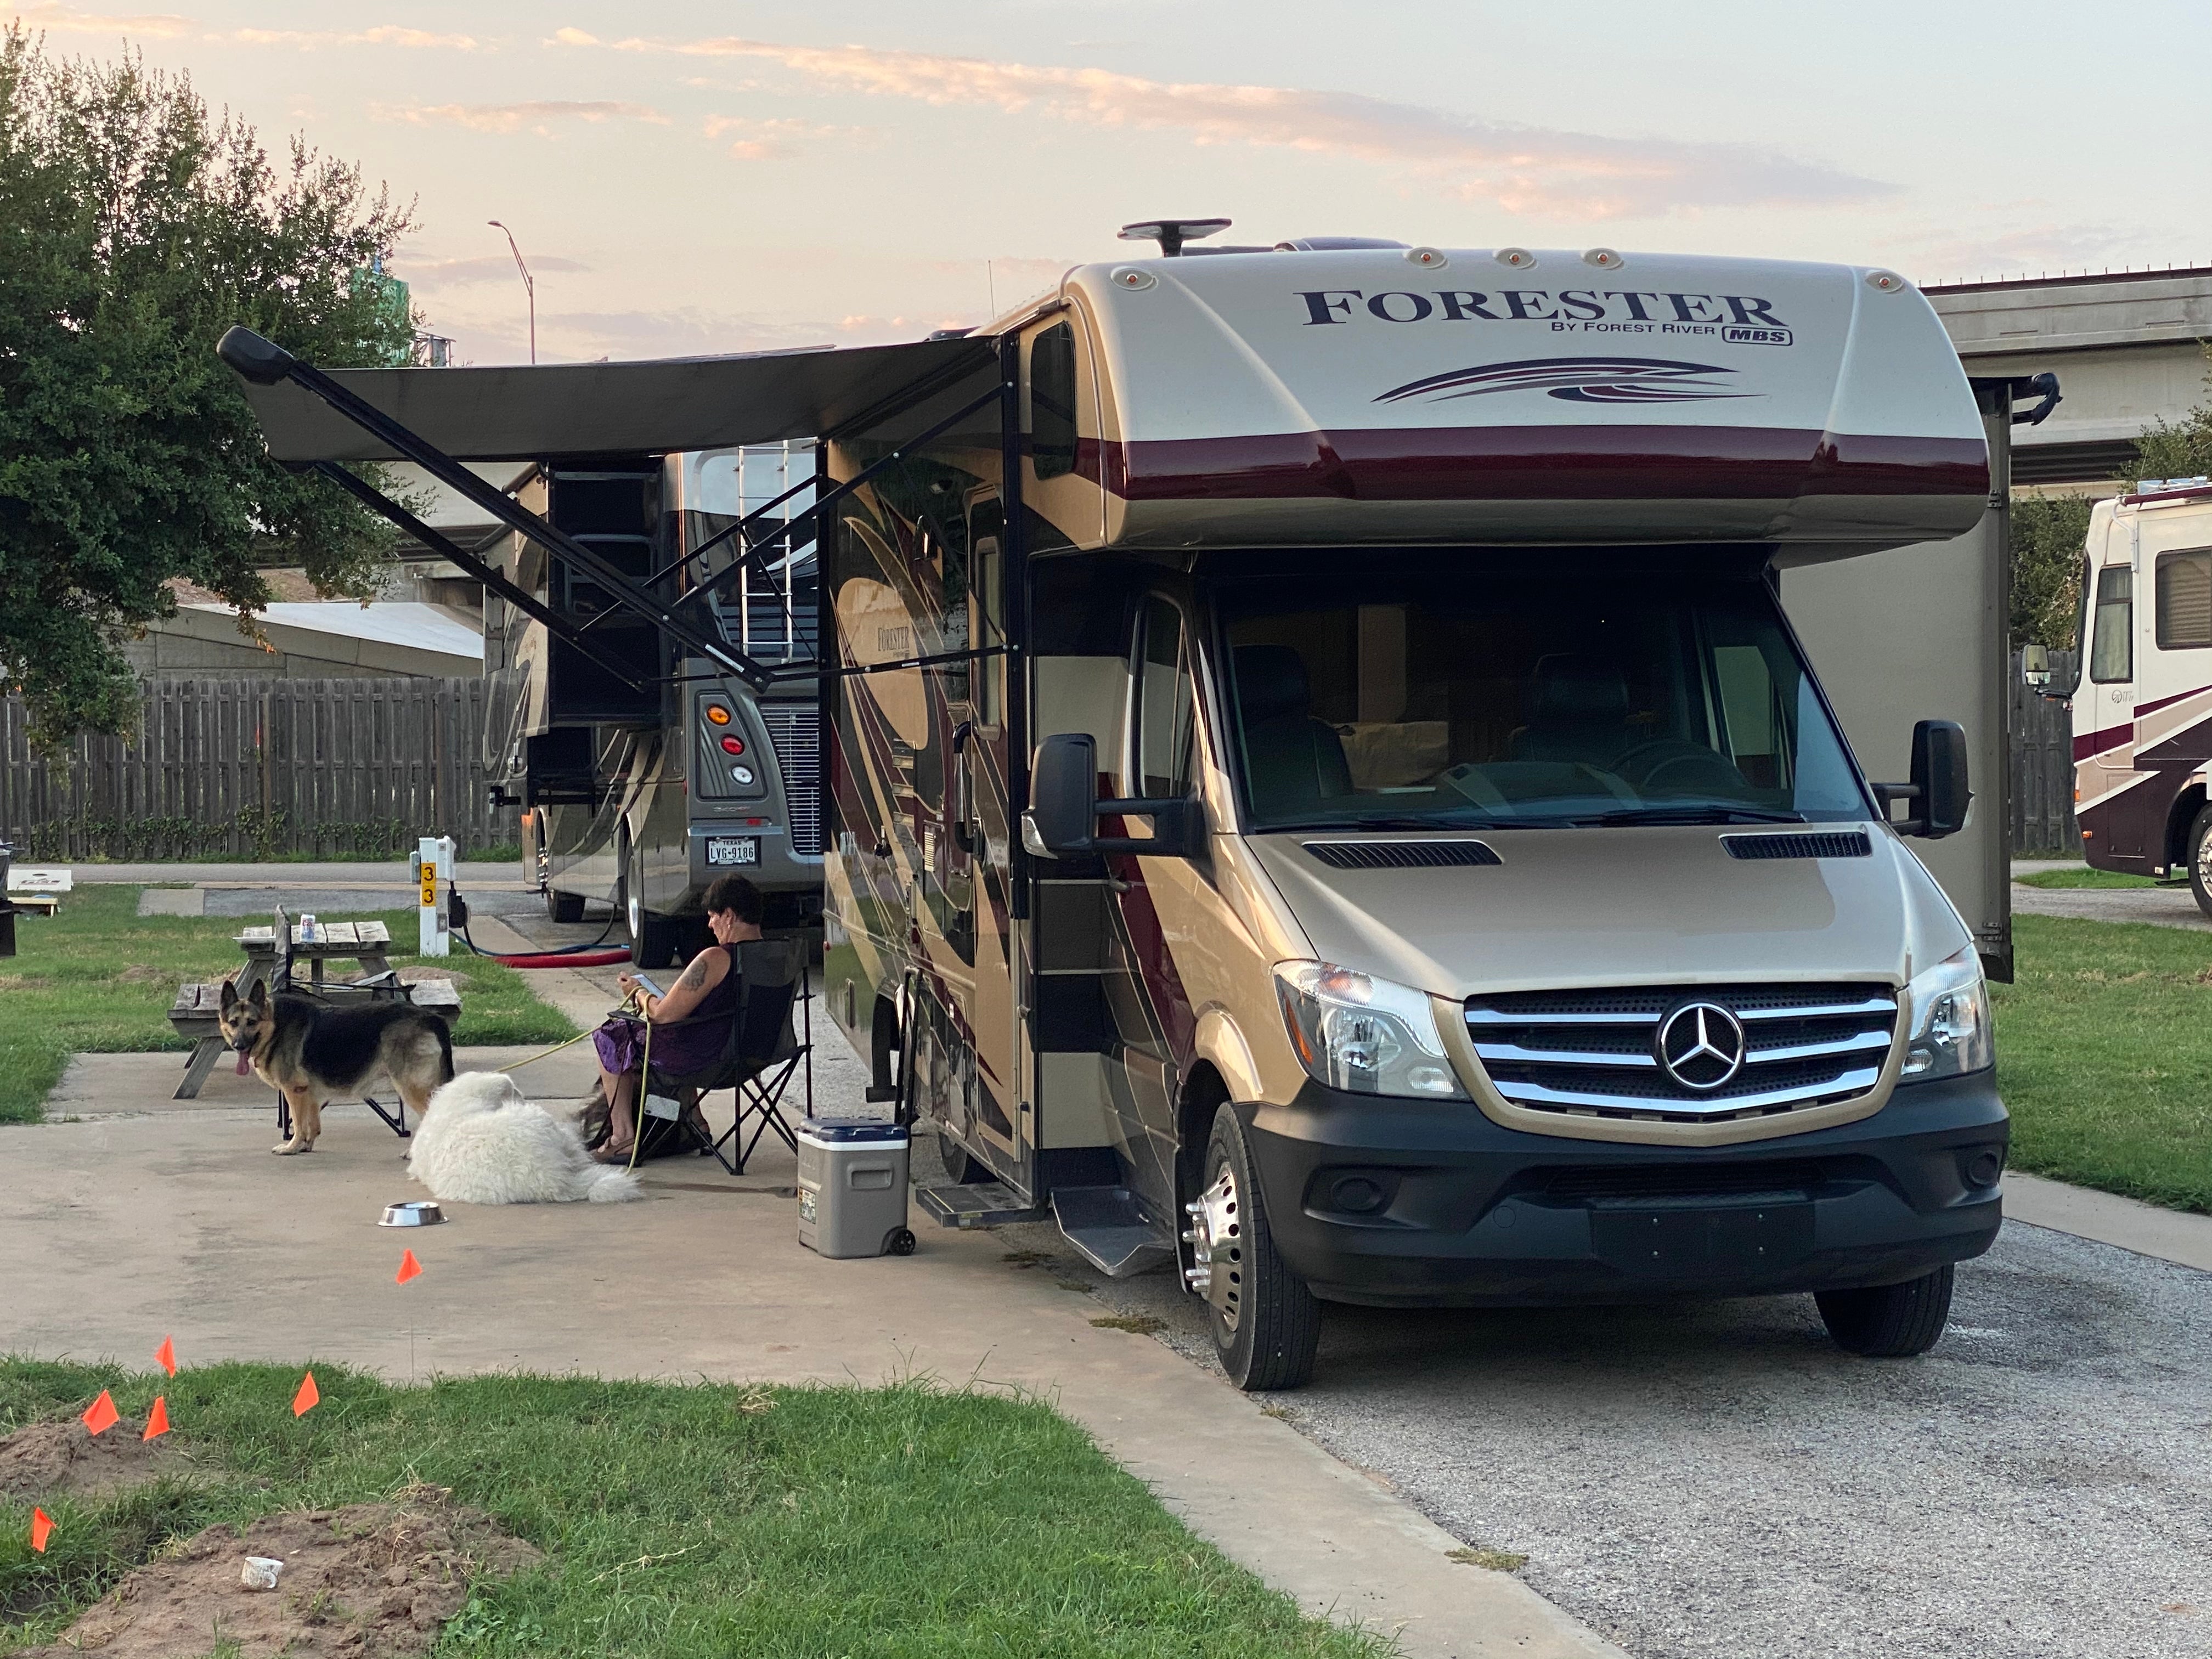 Camper submitted image from Bastrop/Colorado River KOA - 4